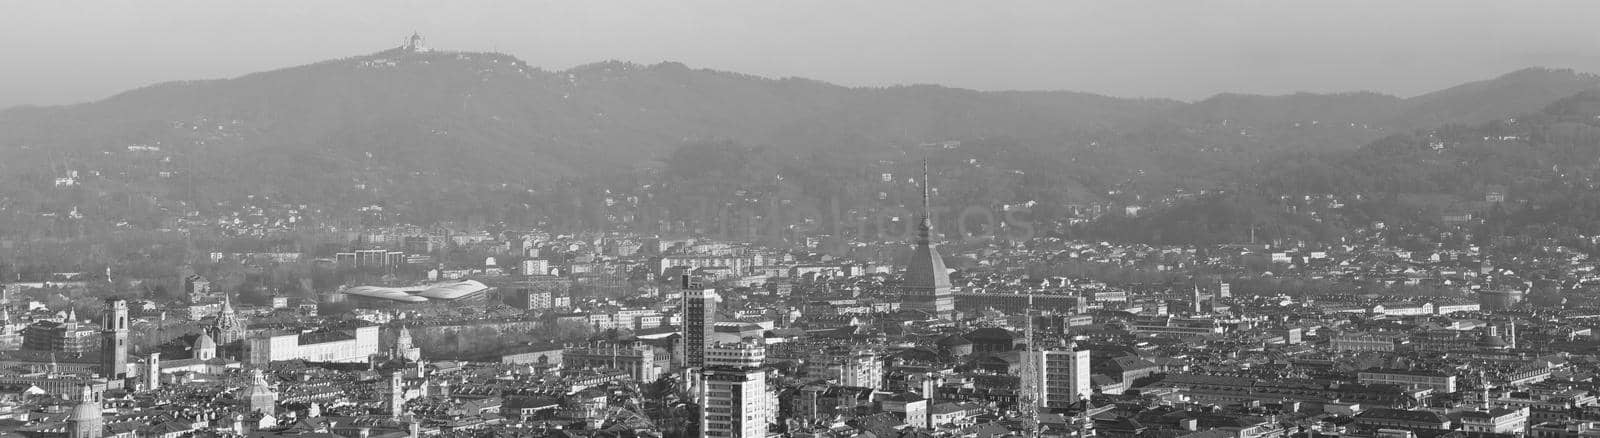 Wide panoramic aerial view of the city of Turin, Italy in black and white